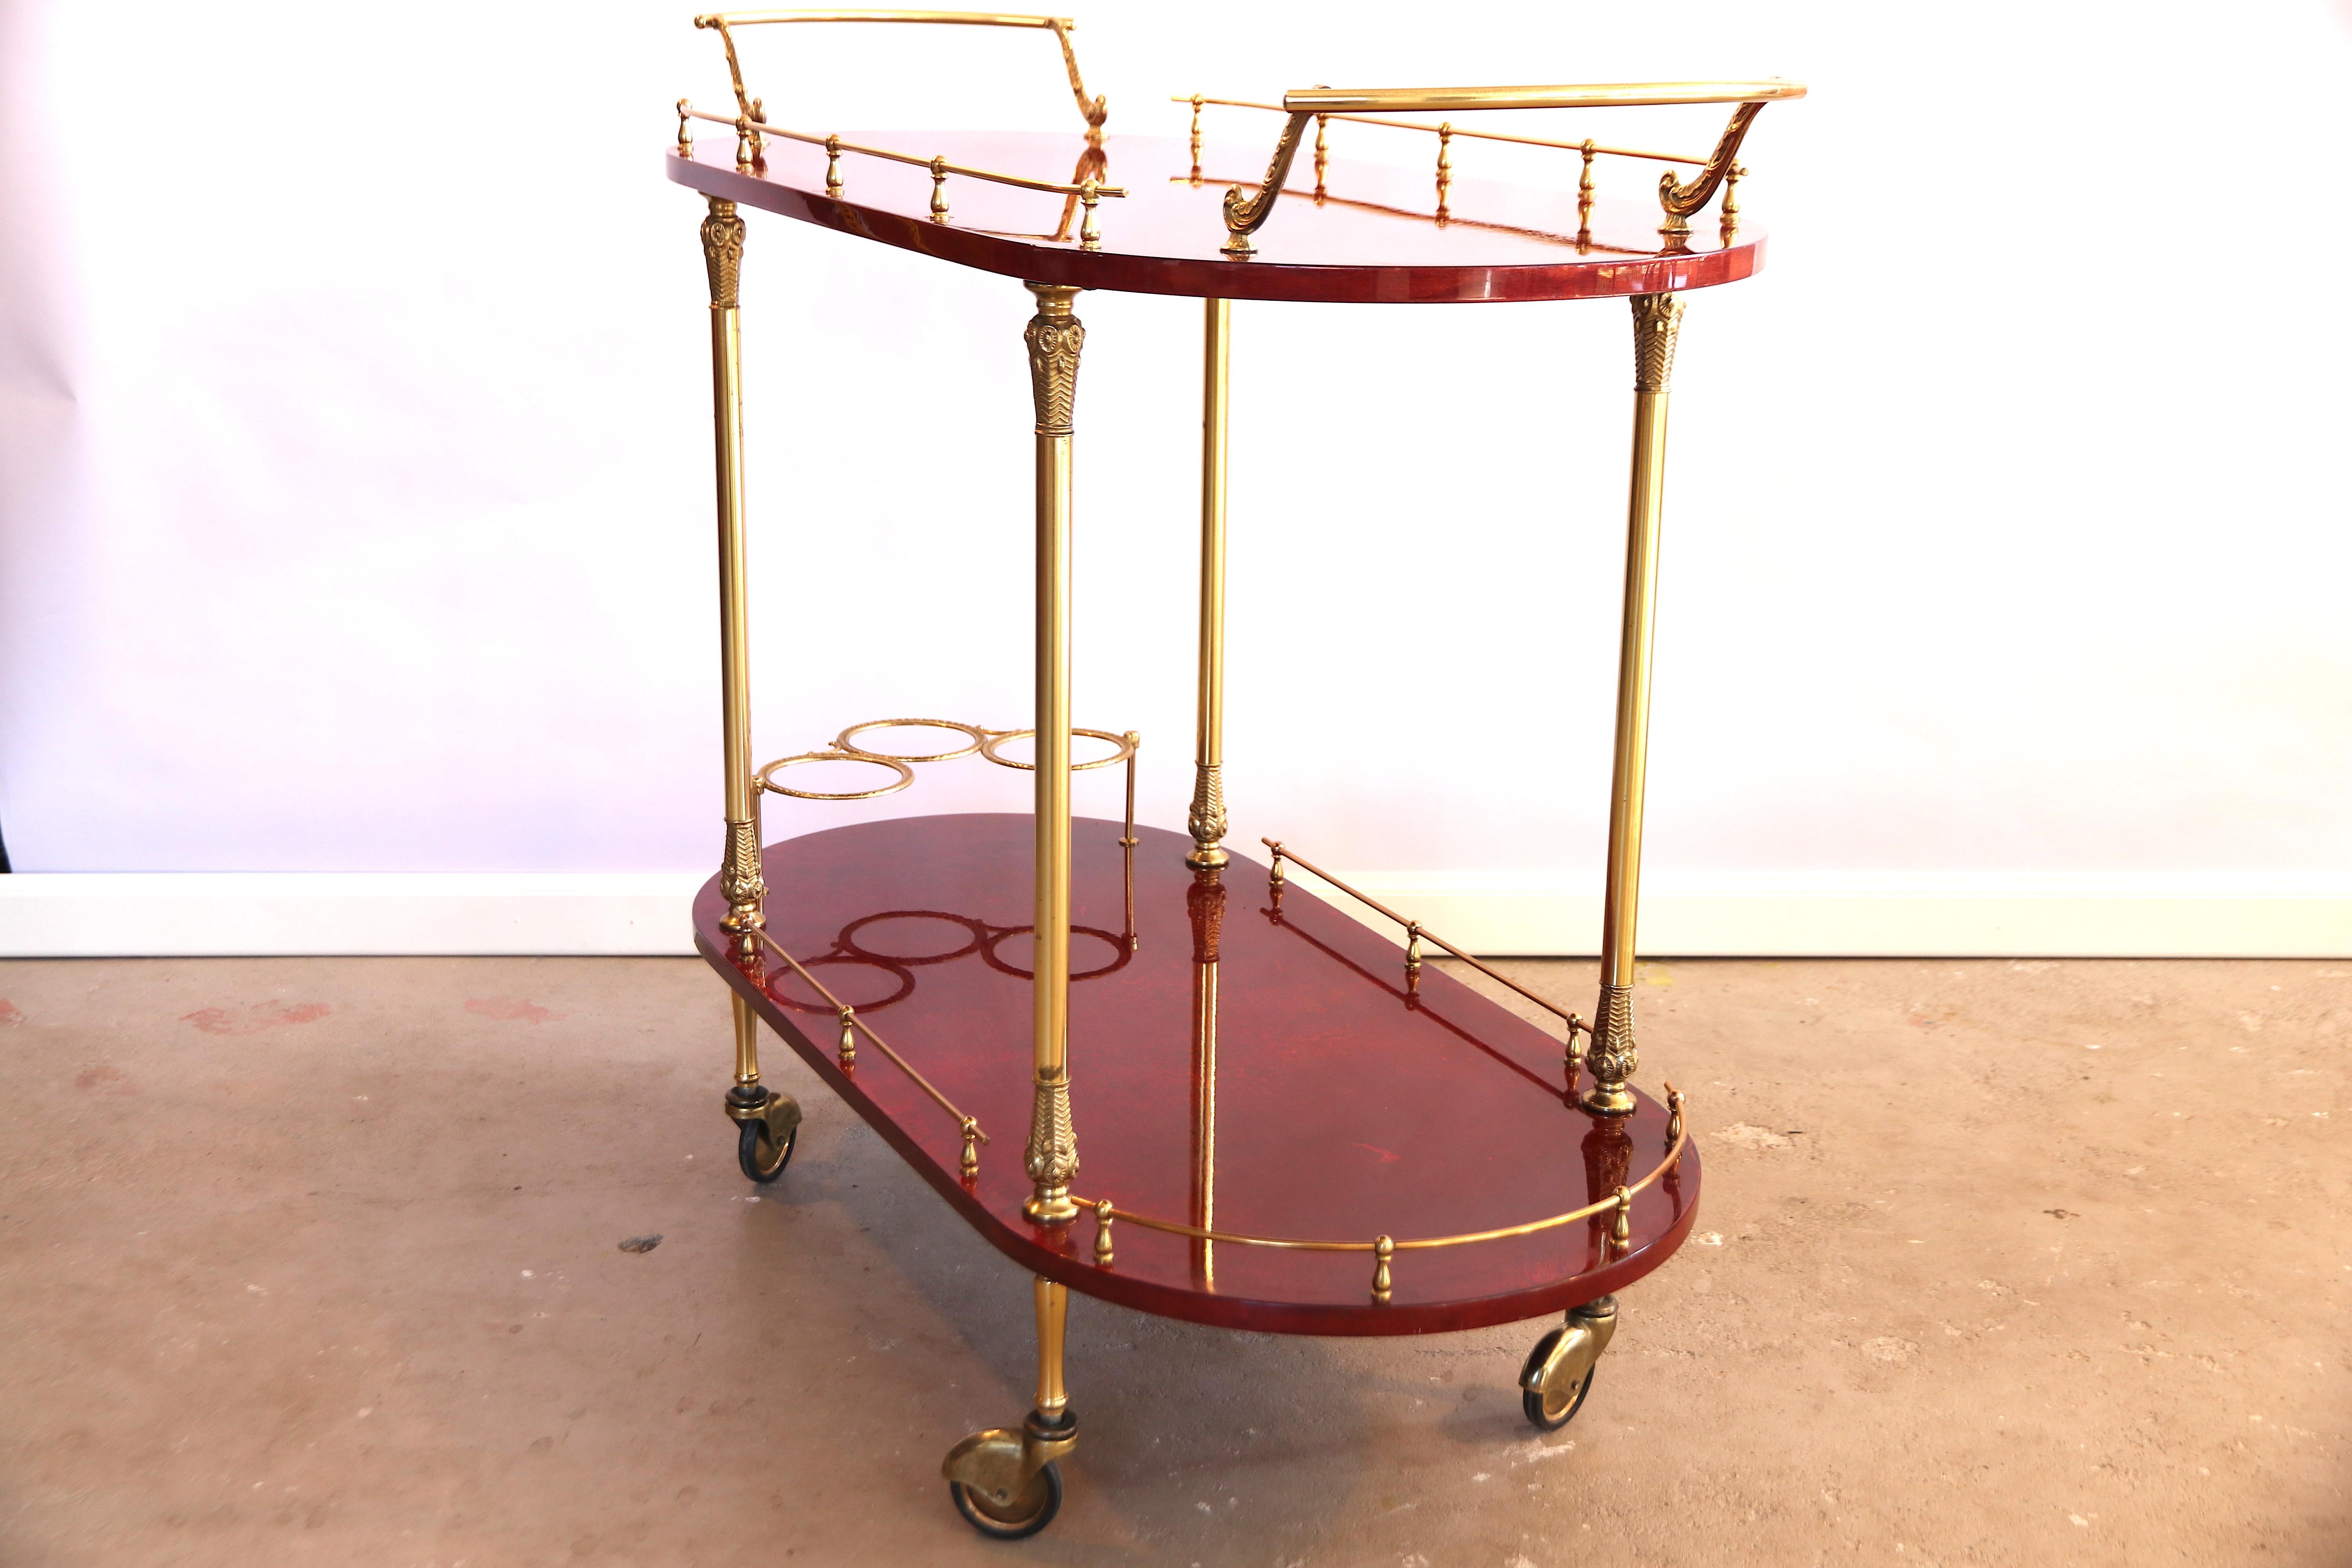 Absolutely amazing rare two-tiered red-dyed goat skin parchment with brass and copper bar cart, liquor trolley or tea trolley. This abundant piece has shiny brass hardware, high gloss lacquered red dyed goatskin parchment, copper casters and 3